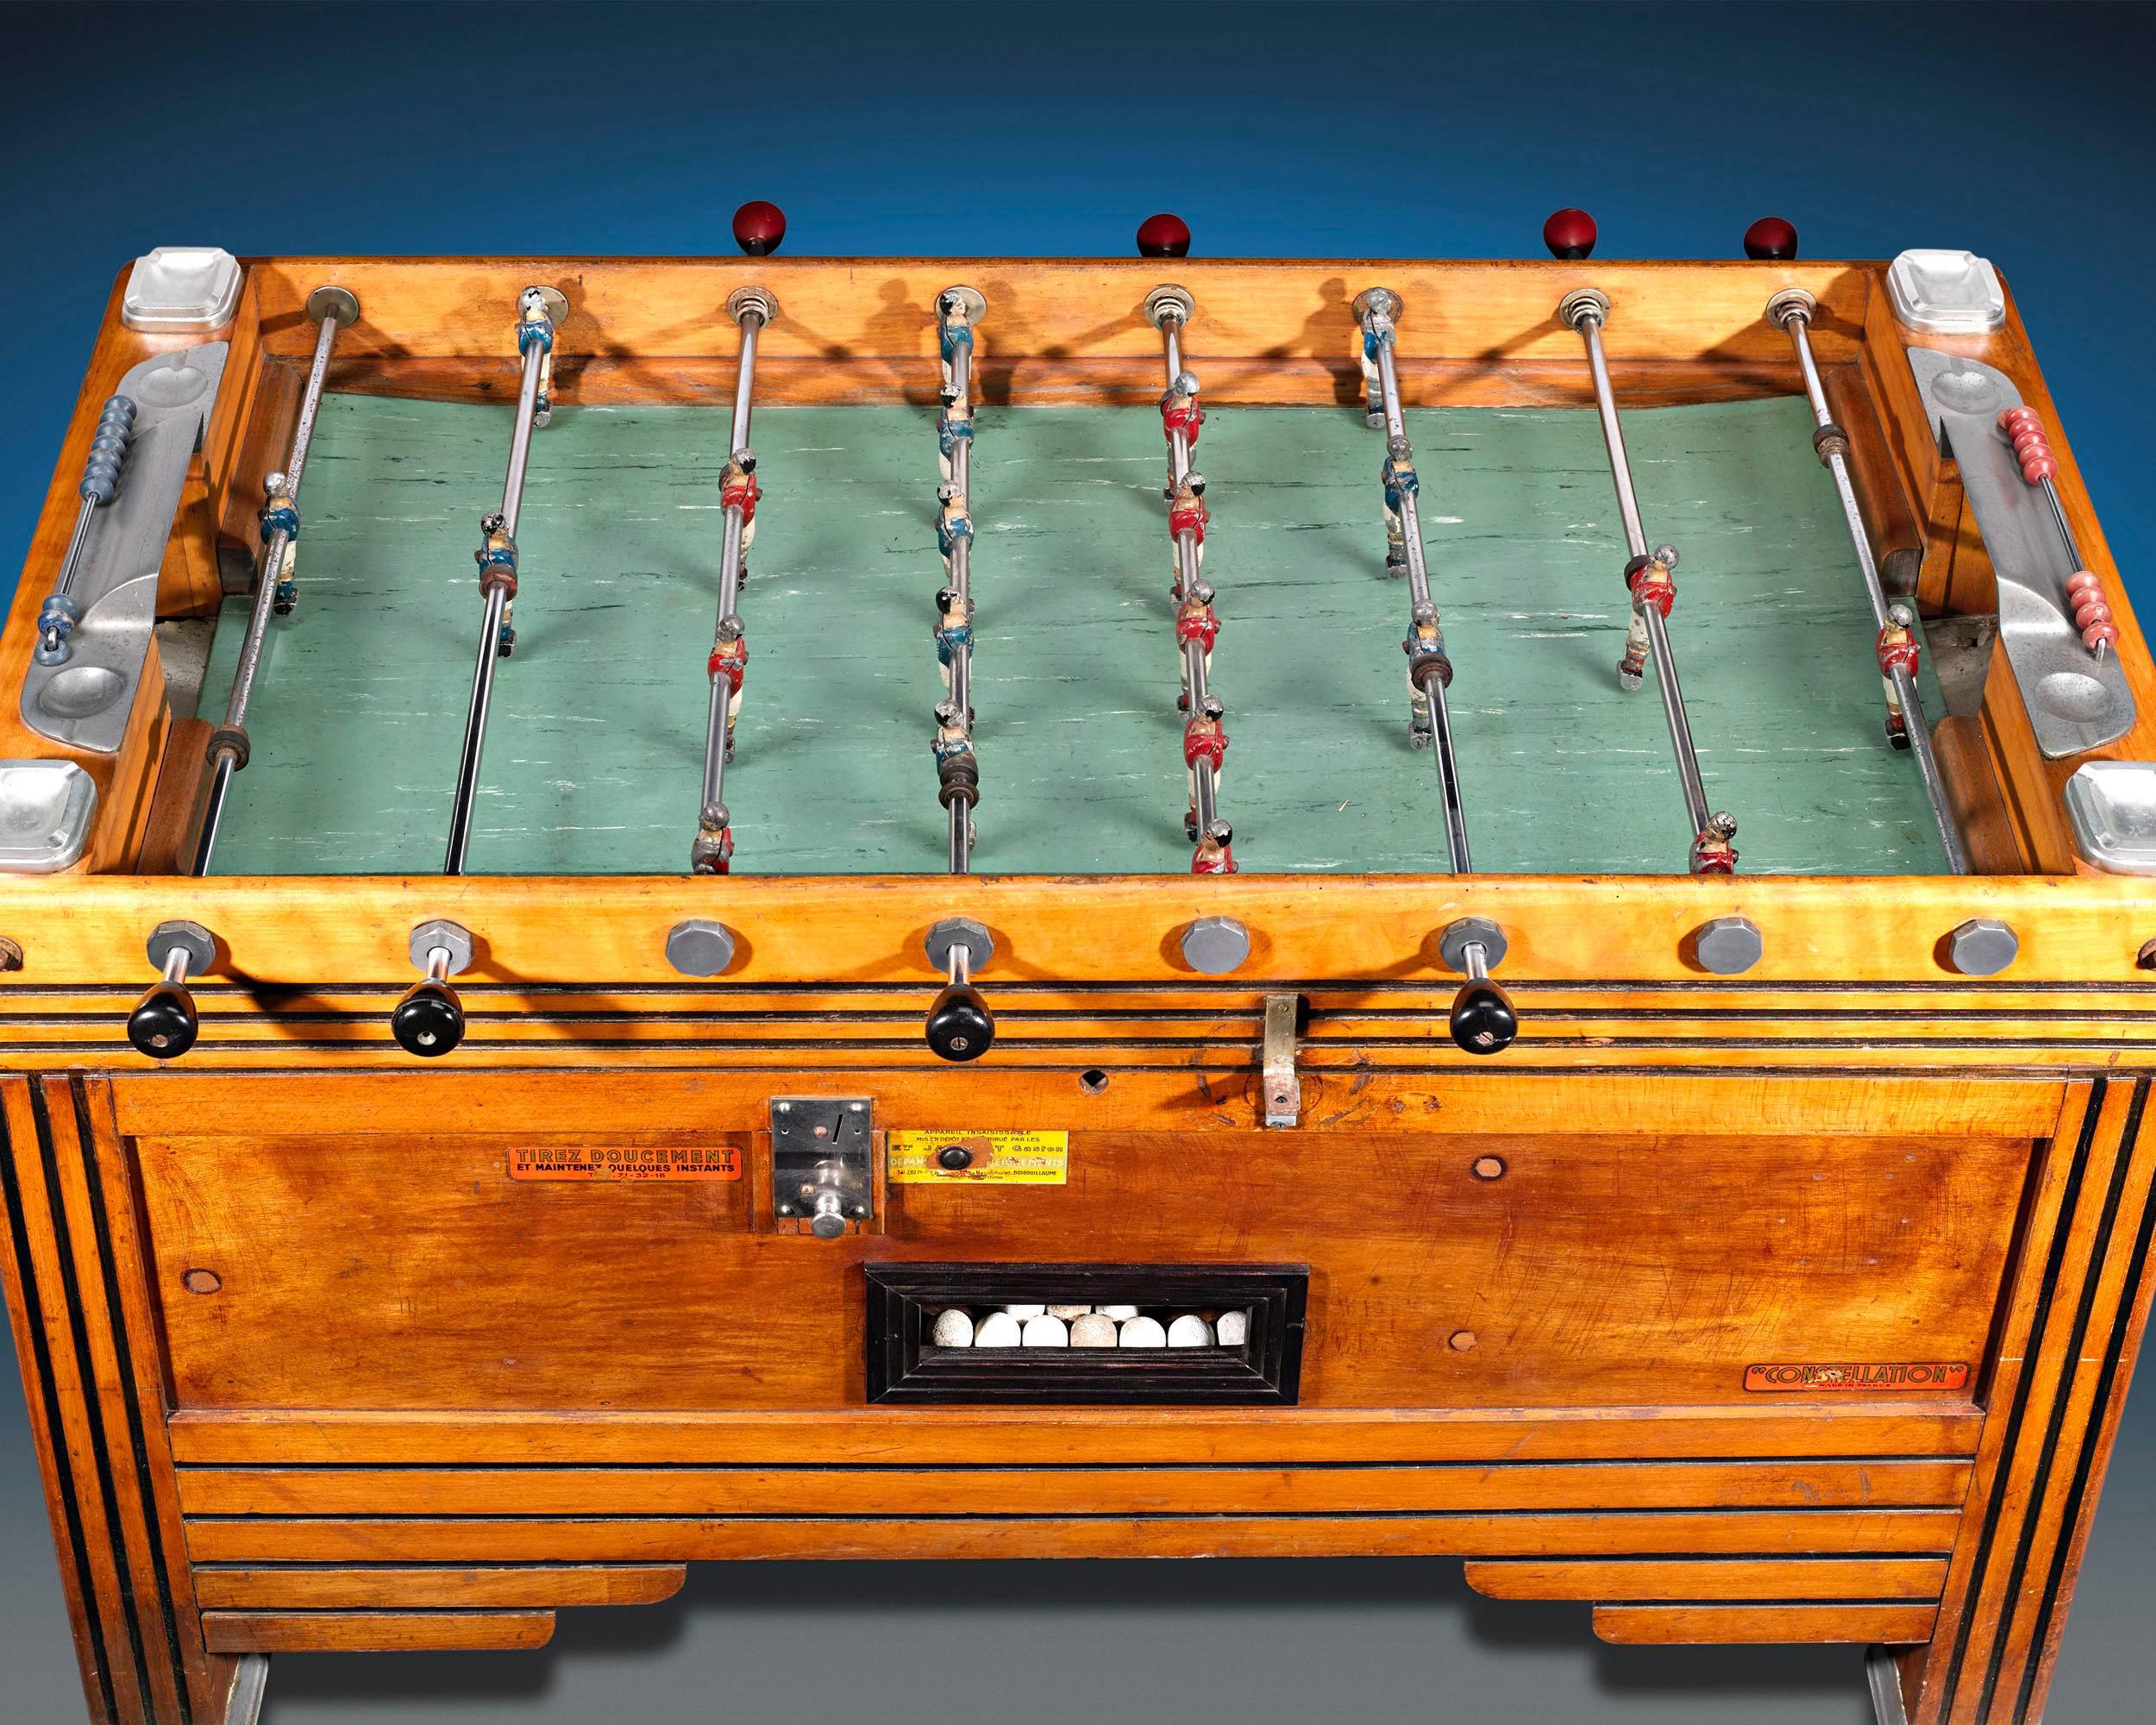 This delightful vintage foosball table is a wonderful and entertaining testament to the French obsession with soccer. The diverting machine is an iconic piece of French popular culture from the mid-20th century, a time when a foosball table could be